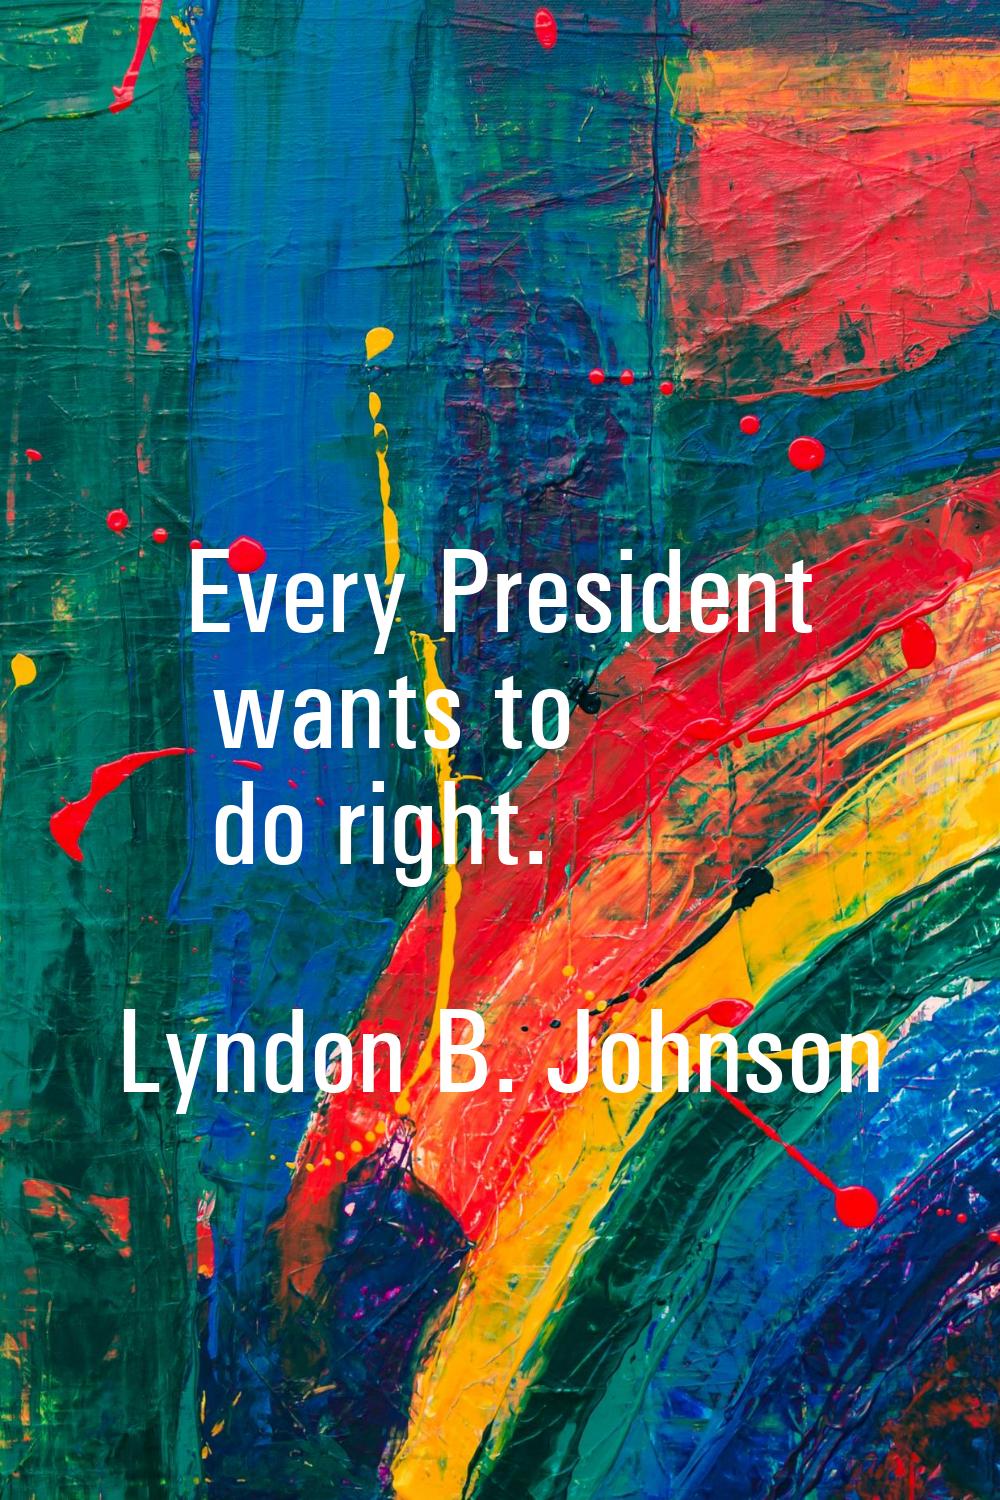 Every President wants to do right.